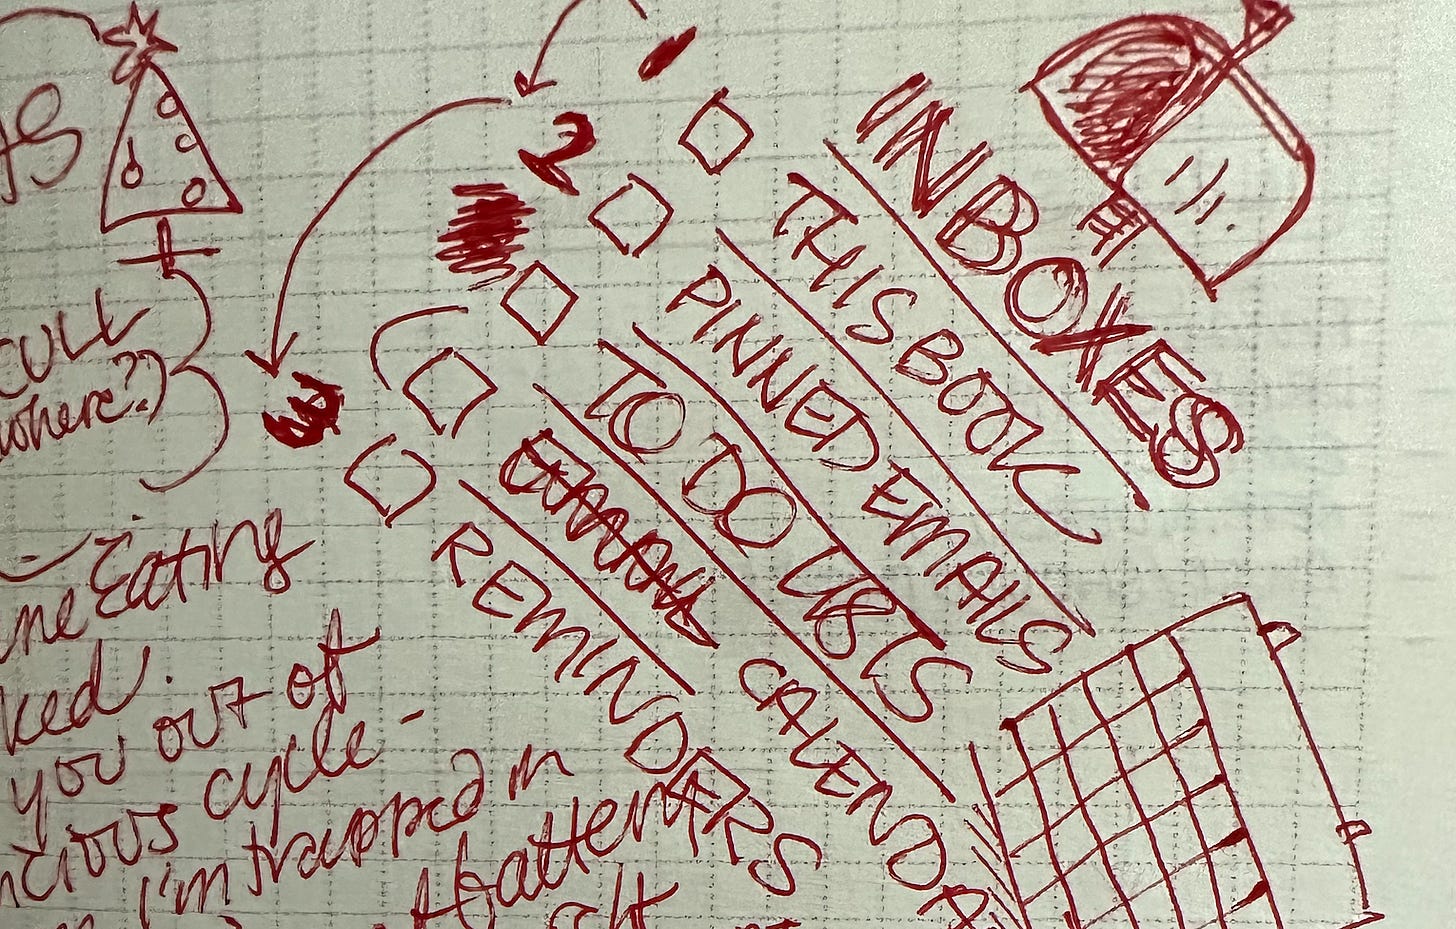 A section of dot grid paper, with scribbled lists and icons drawn in red ink